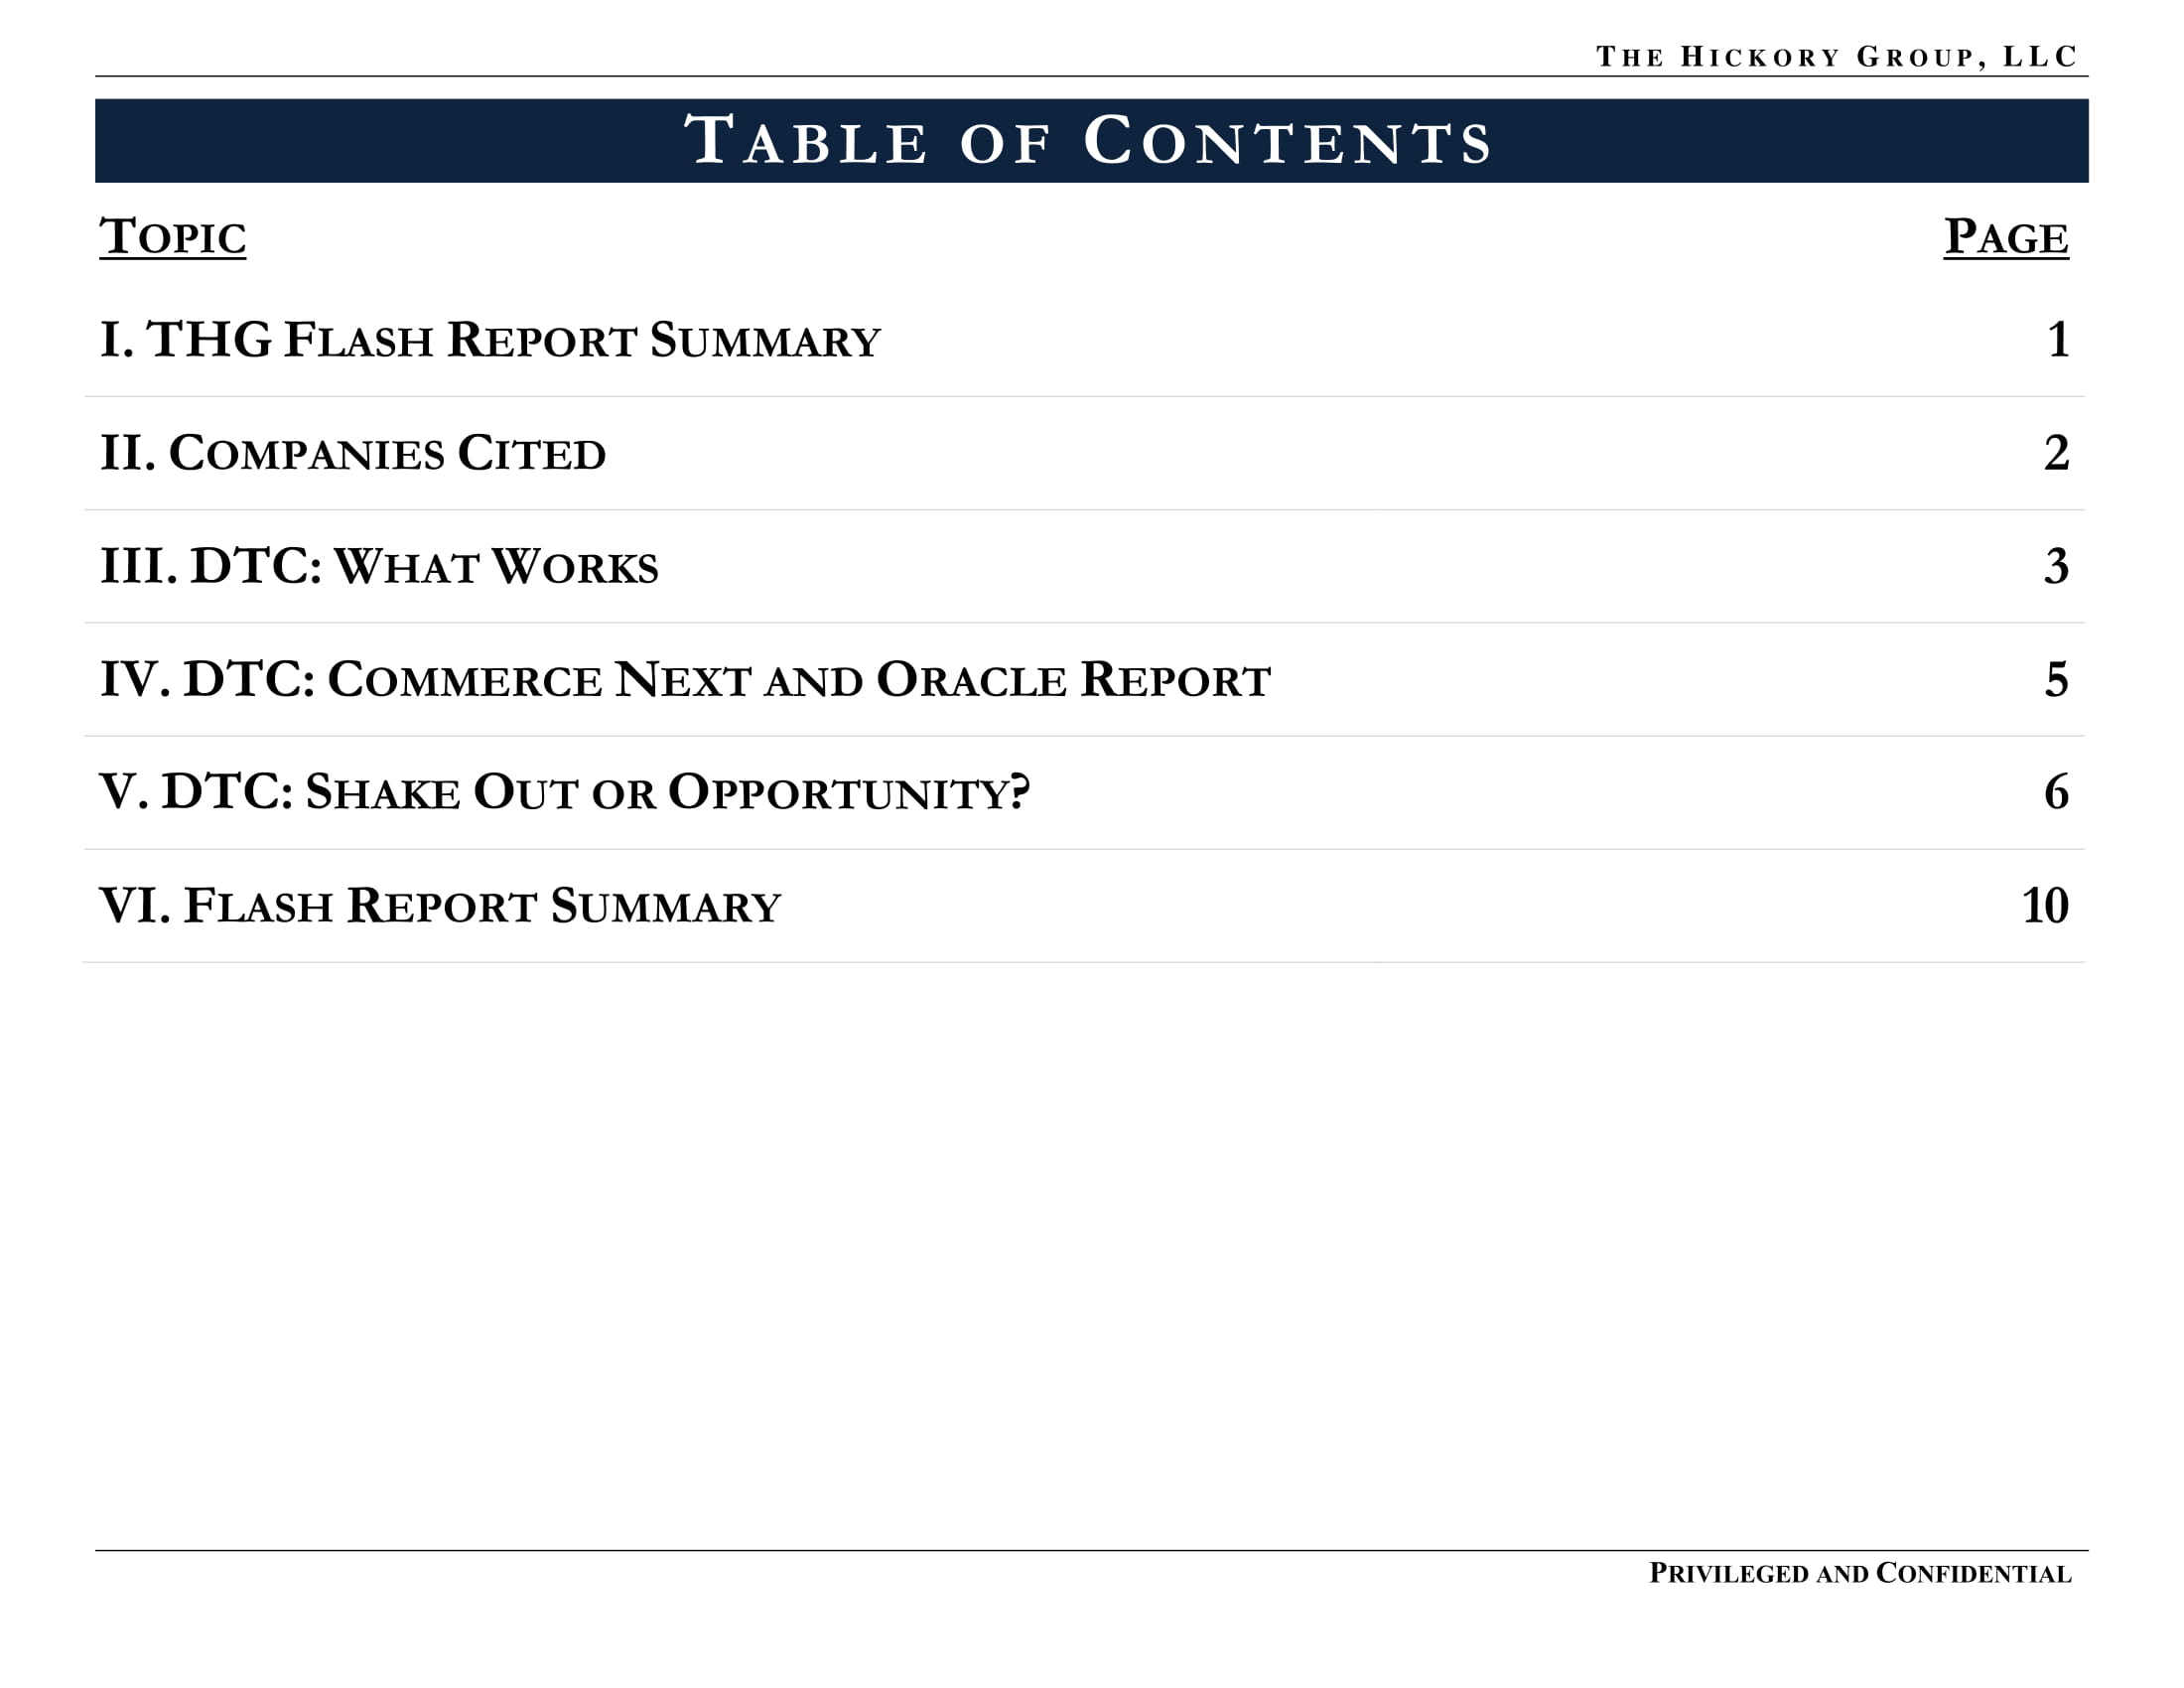 FINAL_THG DTC Flash Report_Q2 2019 _ Public Release (Privileged and Confidential)-02.jpg